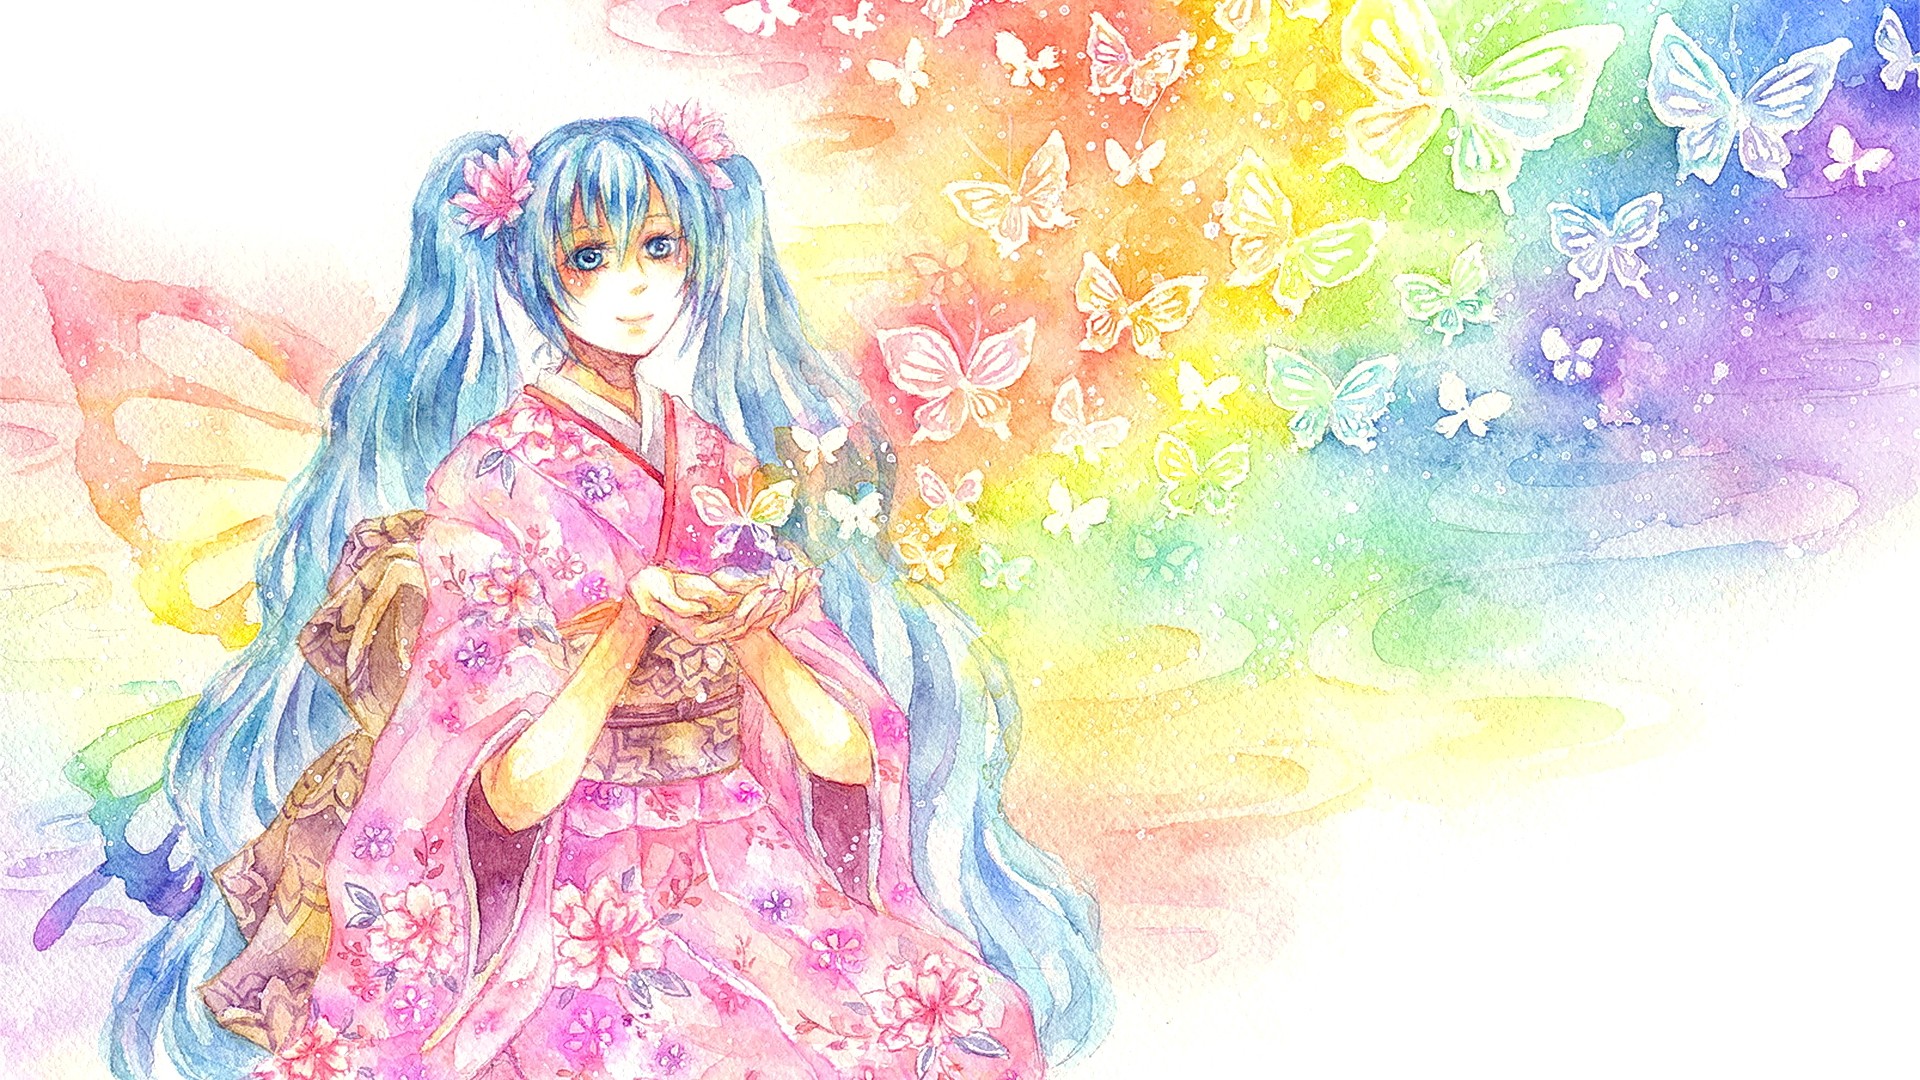 Anime 1920x1080 anime anime girls blue hair long hair looking away Hatsune Miku kimono Vocaloid fantasy art fantasy girl flower in hair butterfly animals insect smiling